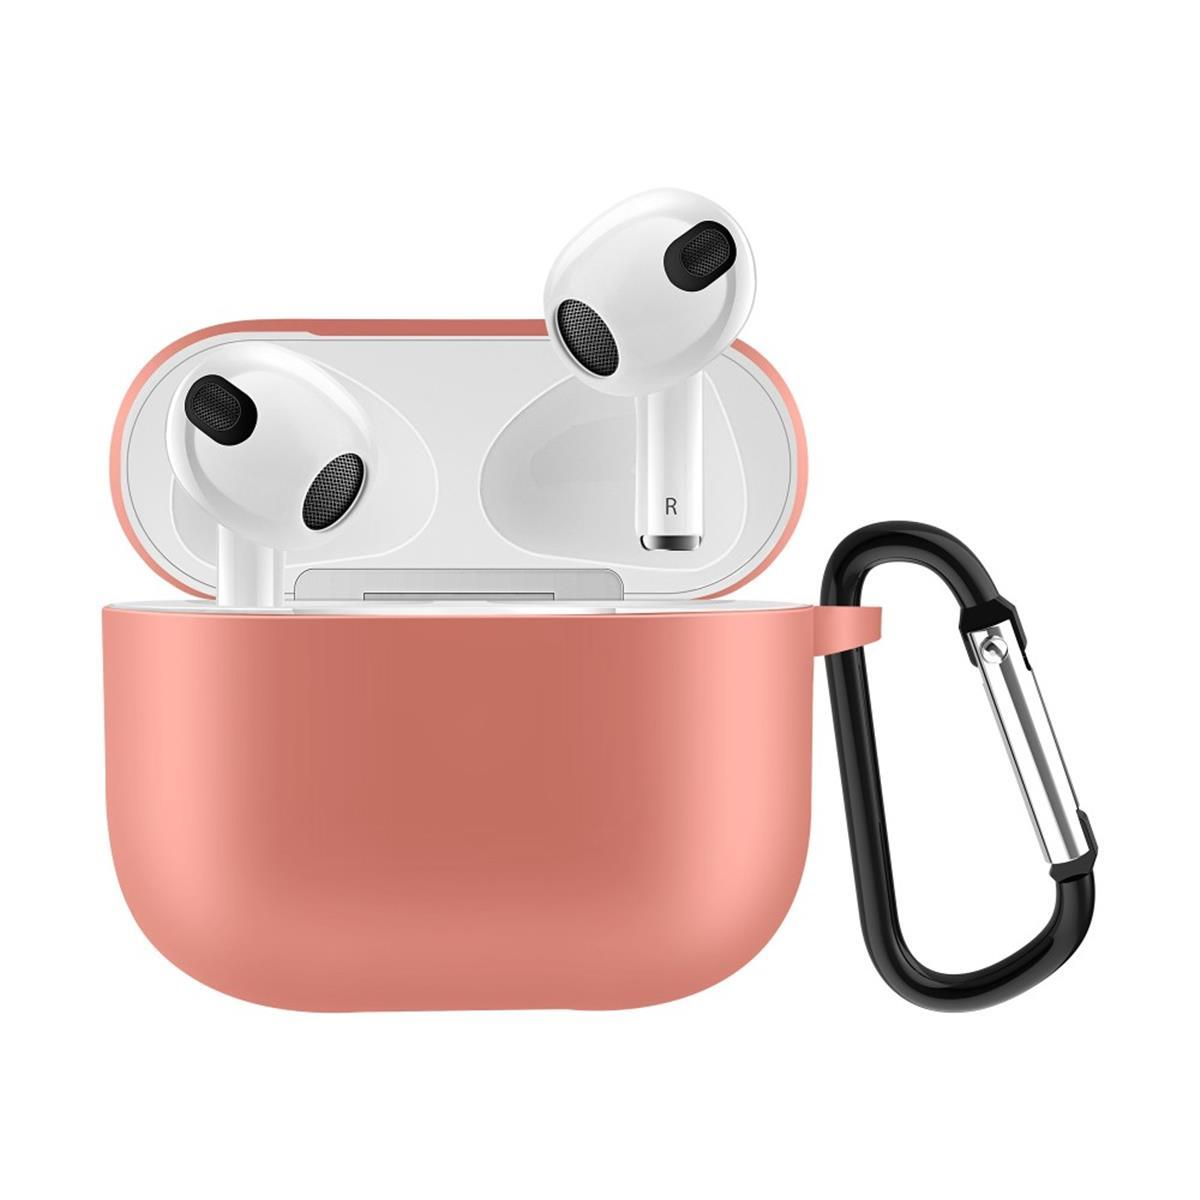 COVERKINGZ Silikoncover 76803 für Unisex, Orange, Ladecase AirPods Apple 3